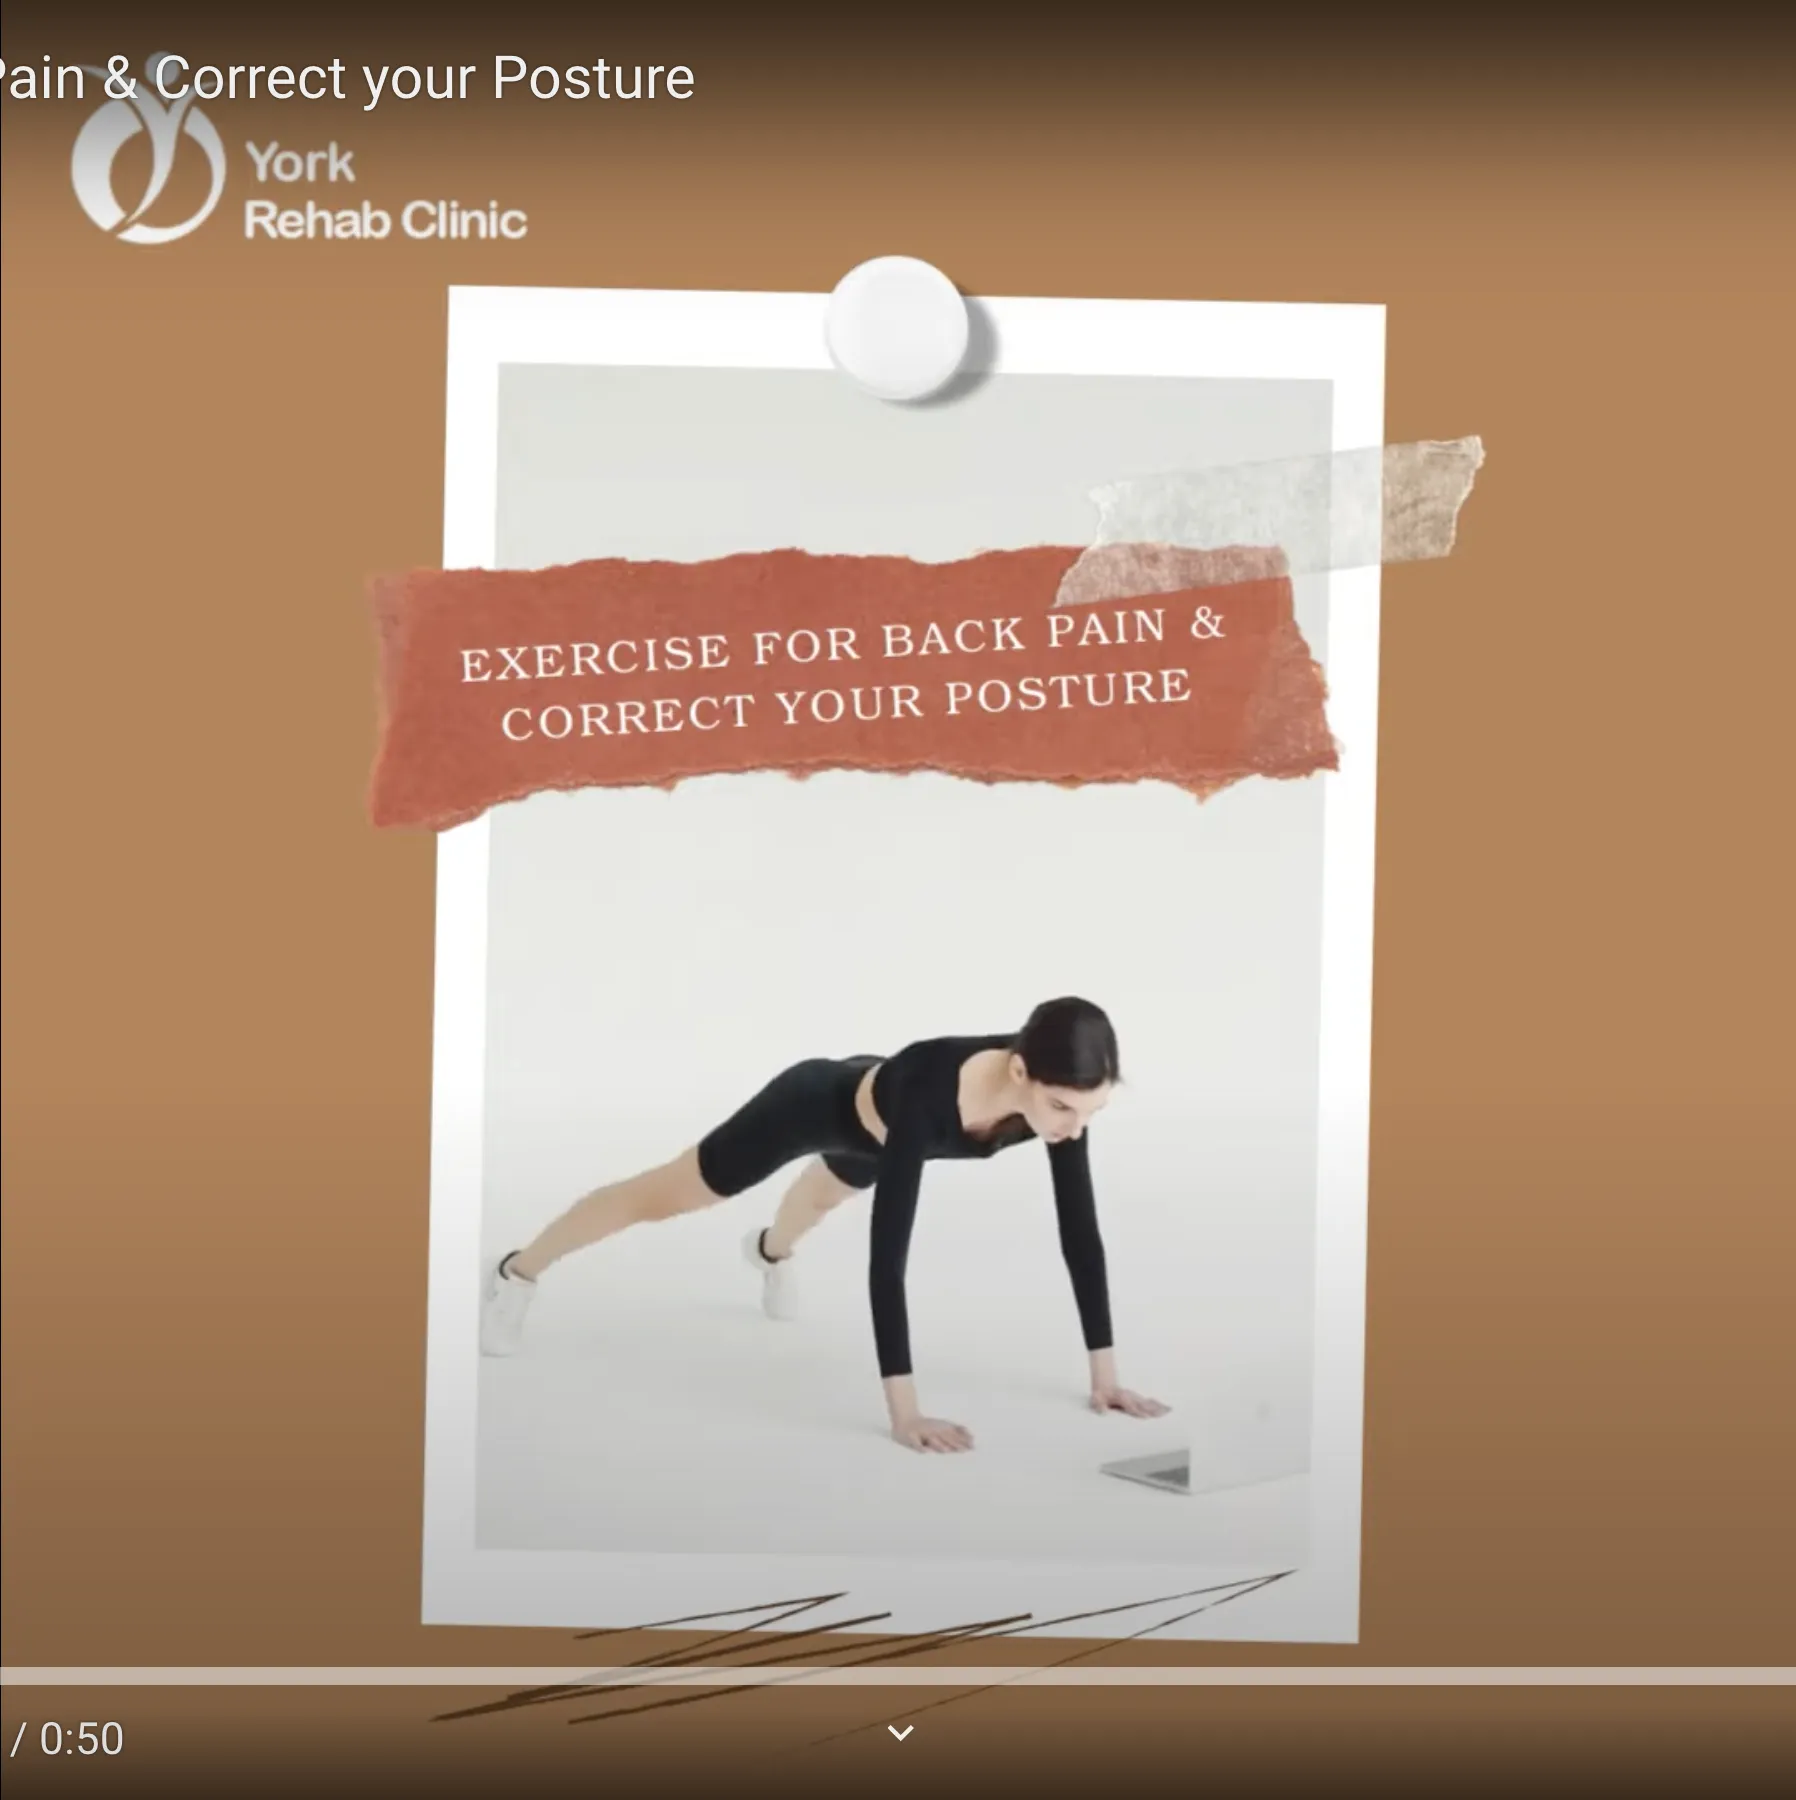 Exercise for Back Pain & Correct your Posture